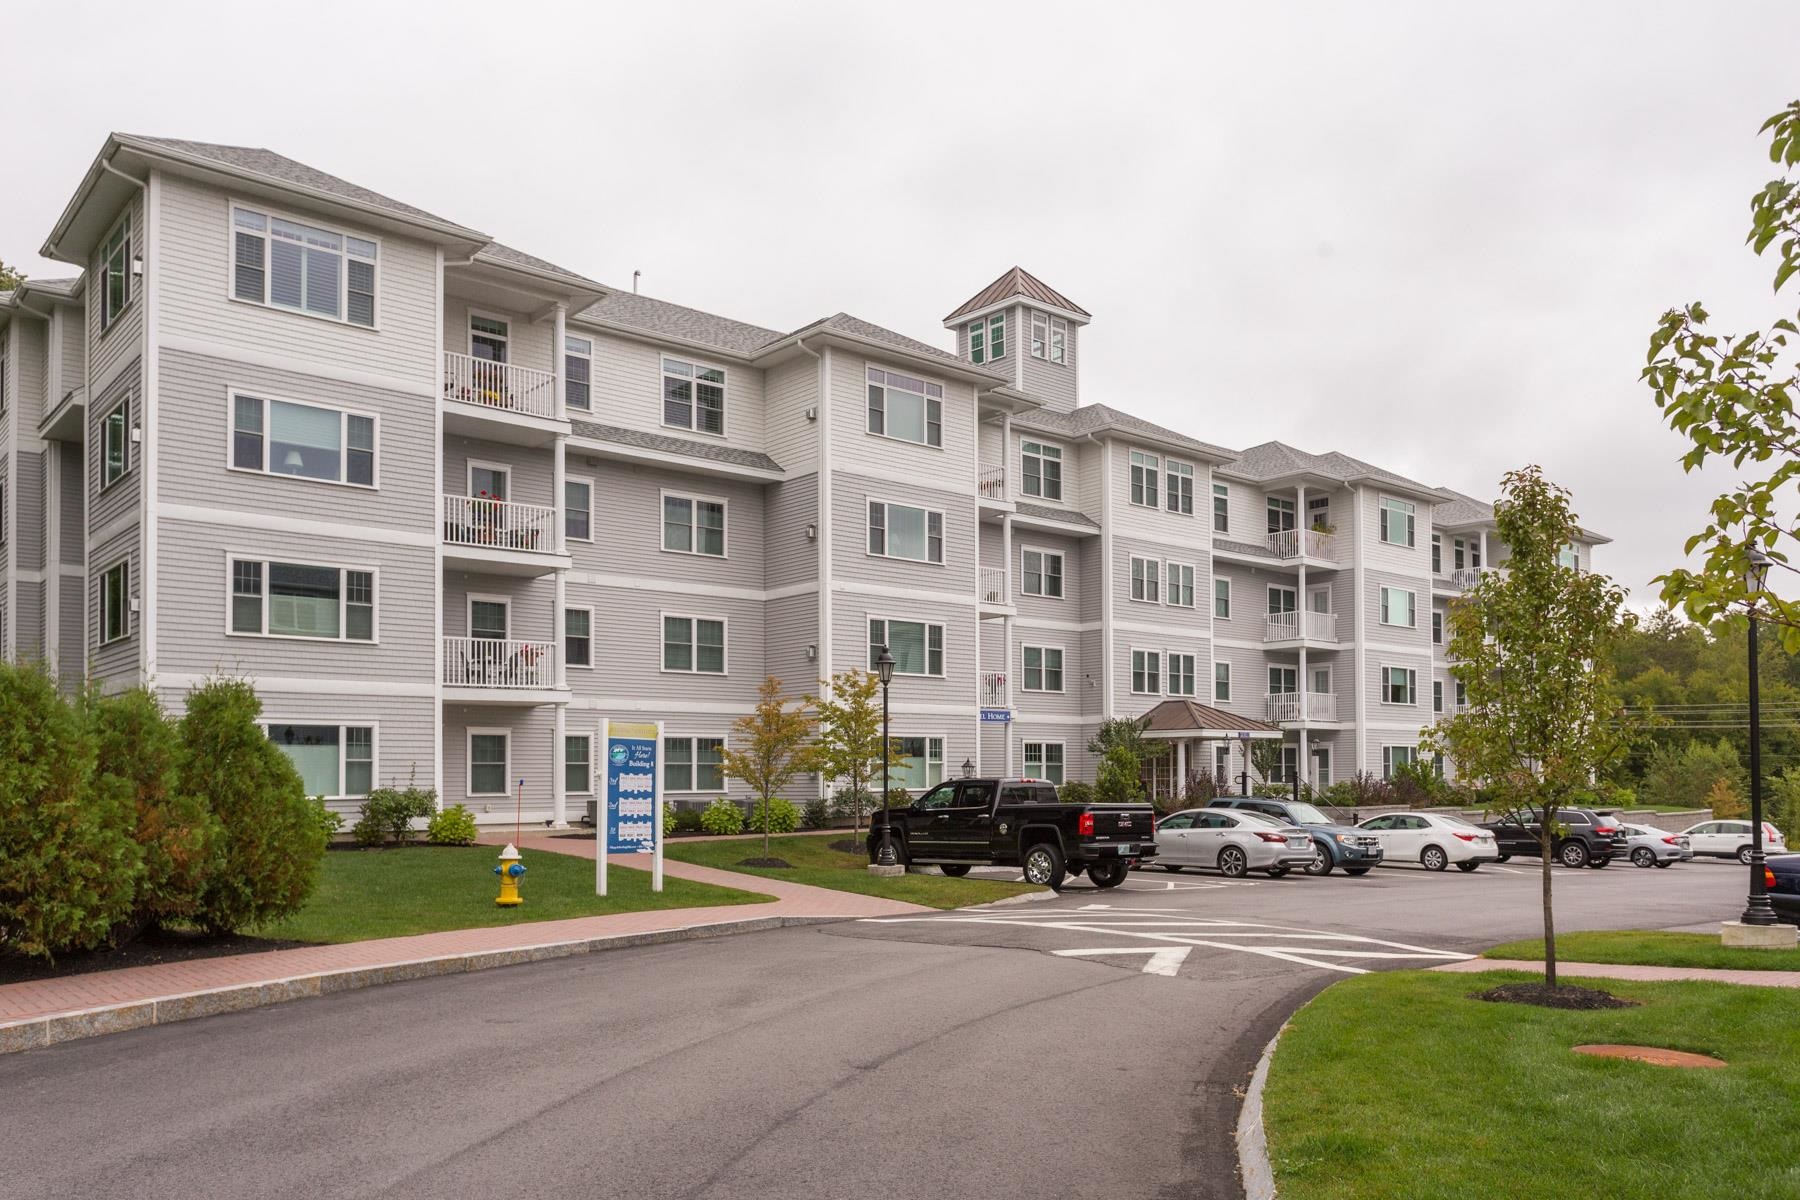 MLS 4942323: 7 Sterling Hill Lane-Unit 723, Exeter NH